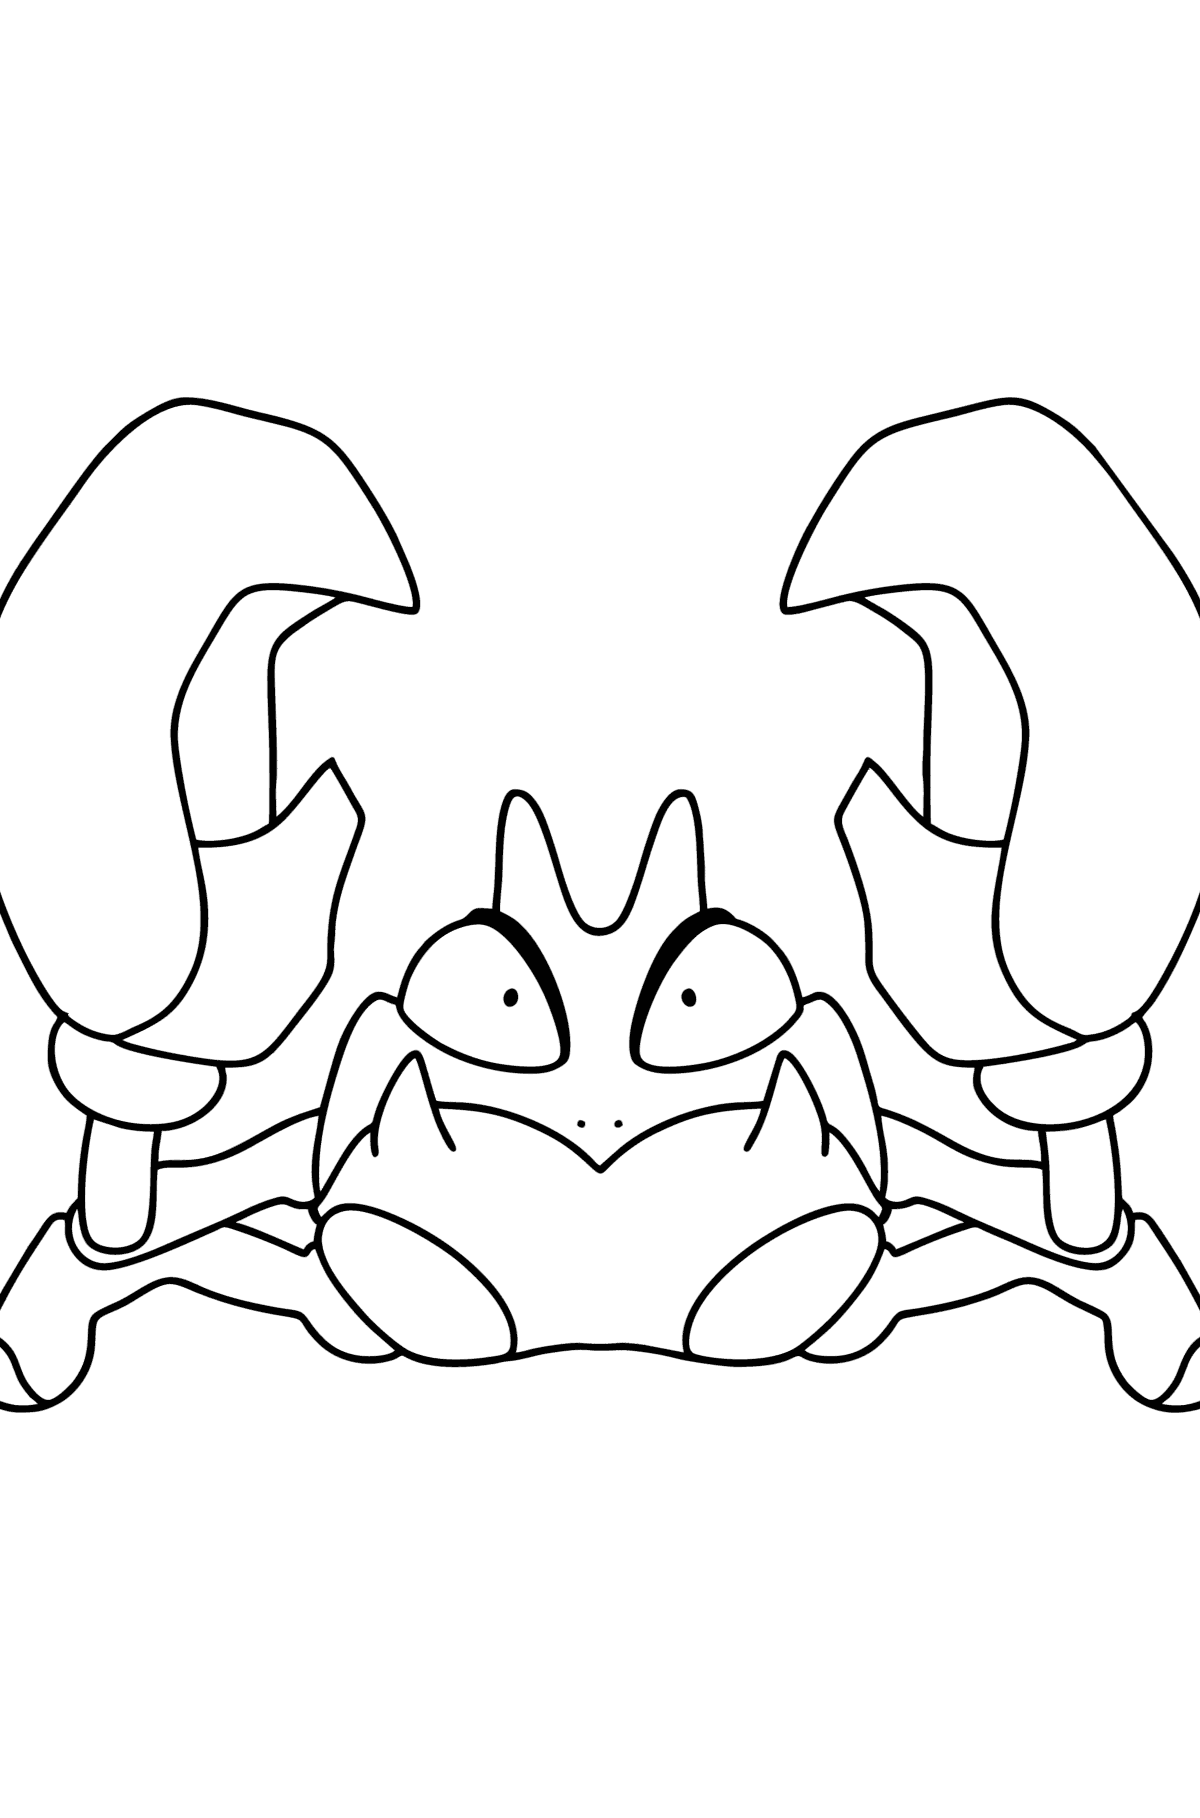 Pokemon Go Krabby coloring page - Coloring Pages for Kids